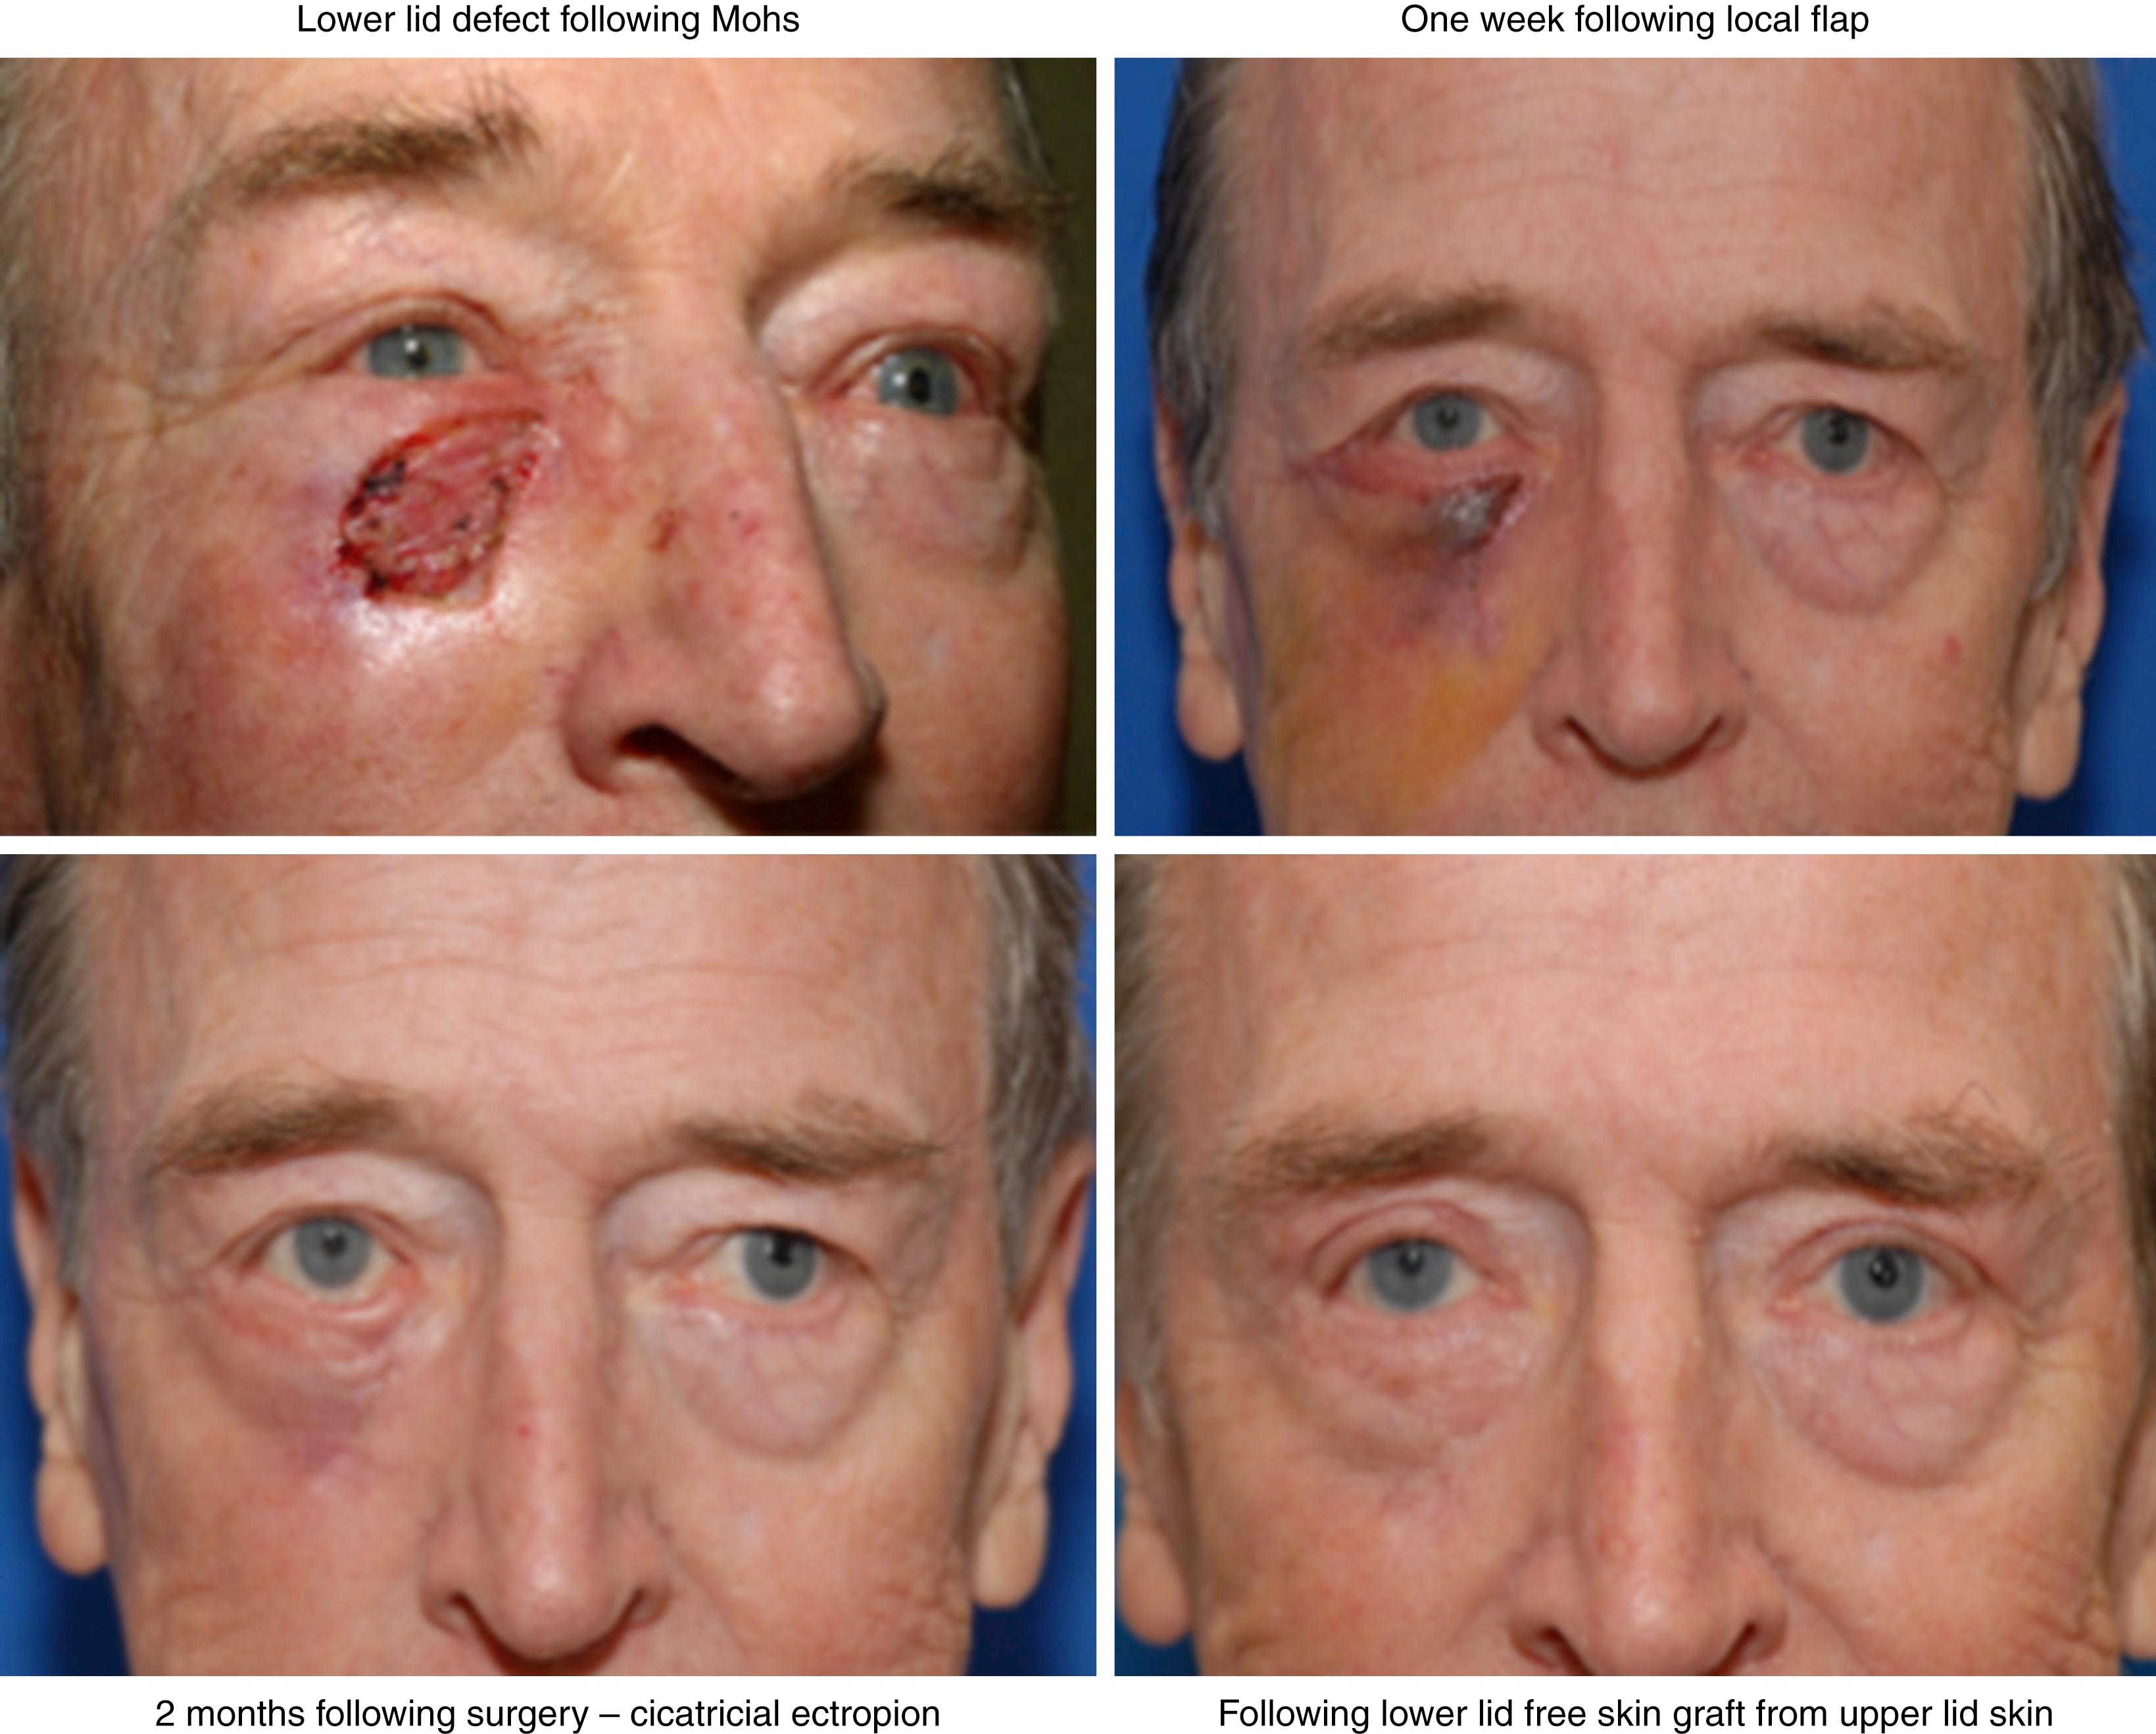 Fig. 31.4, Staged approach to lower eyelid reconstruction. First, the lower eyelid defect is closed with a local advancement flap. Two months later, cicatricial ectropion is noted, which is sometimes unavoidable in older individuals with lower eyelid laxity. This is repaired with a free skin graft from the upper eyelid, paired with a contralateral blepharoplasty for optimal cosmesis.